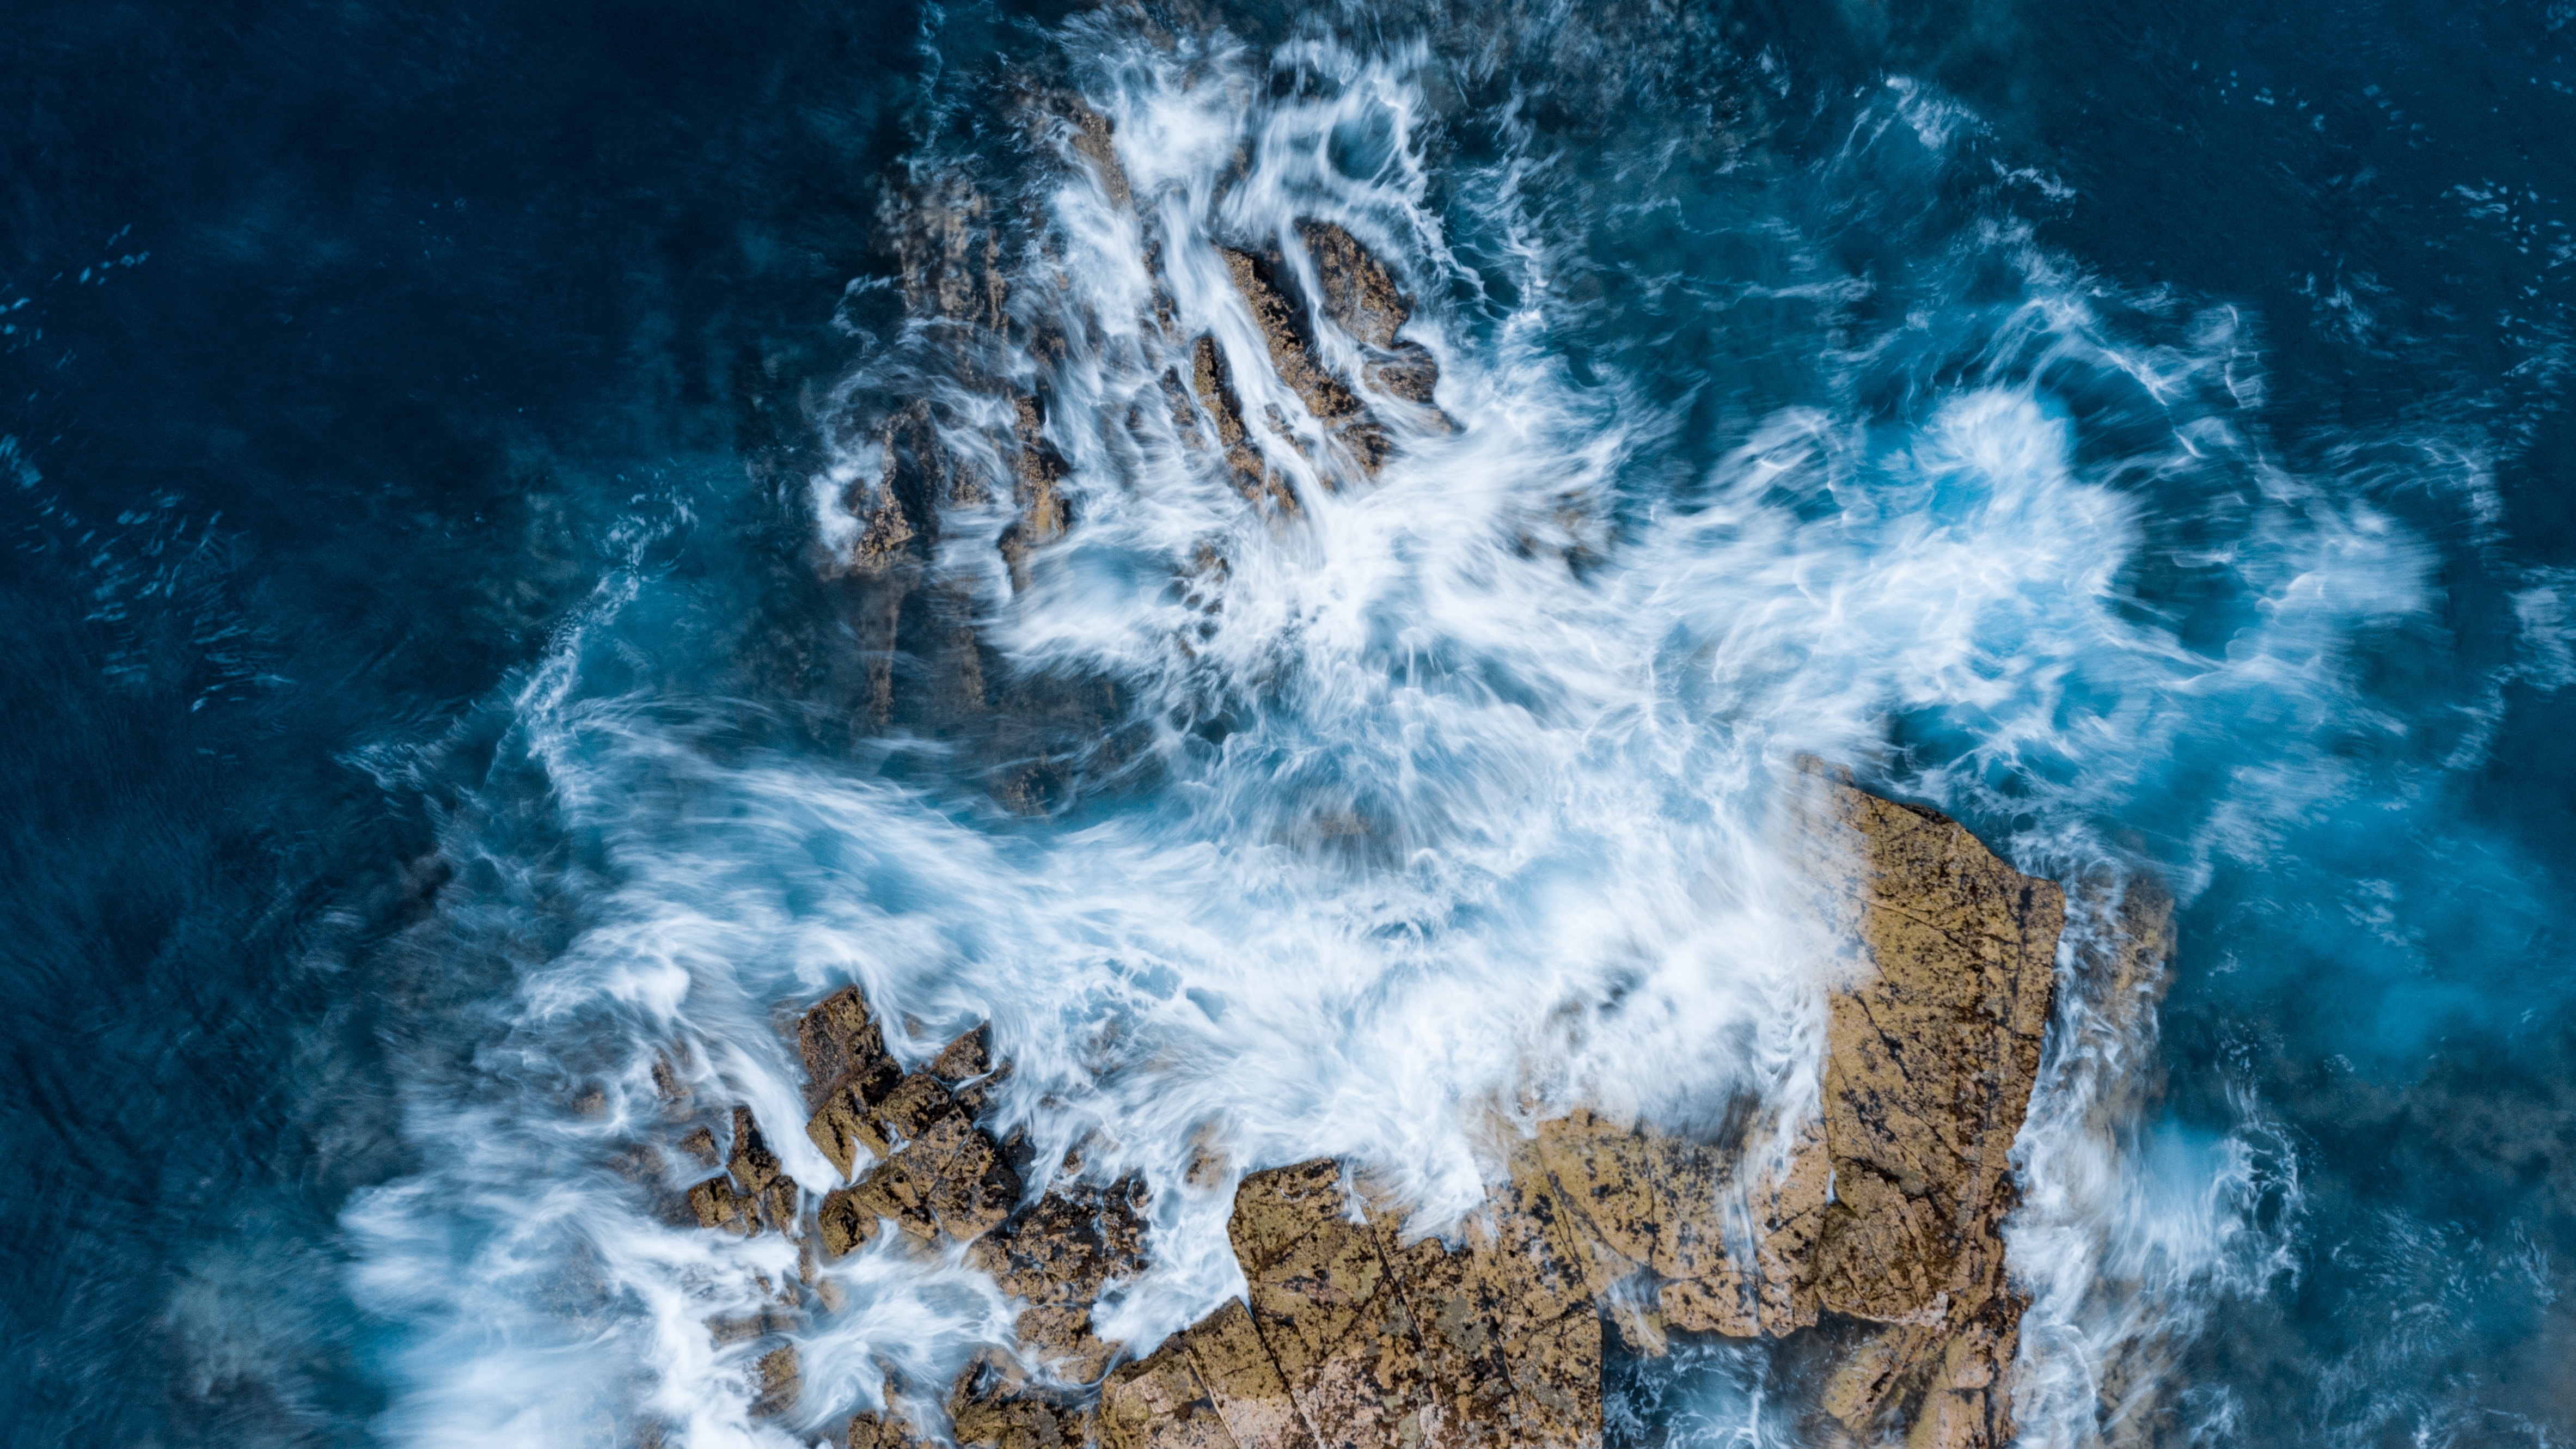 Wallpaper Full HD nature, water, waves, sea, rocks, view from above